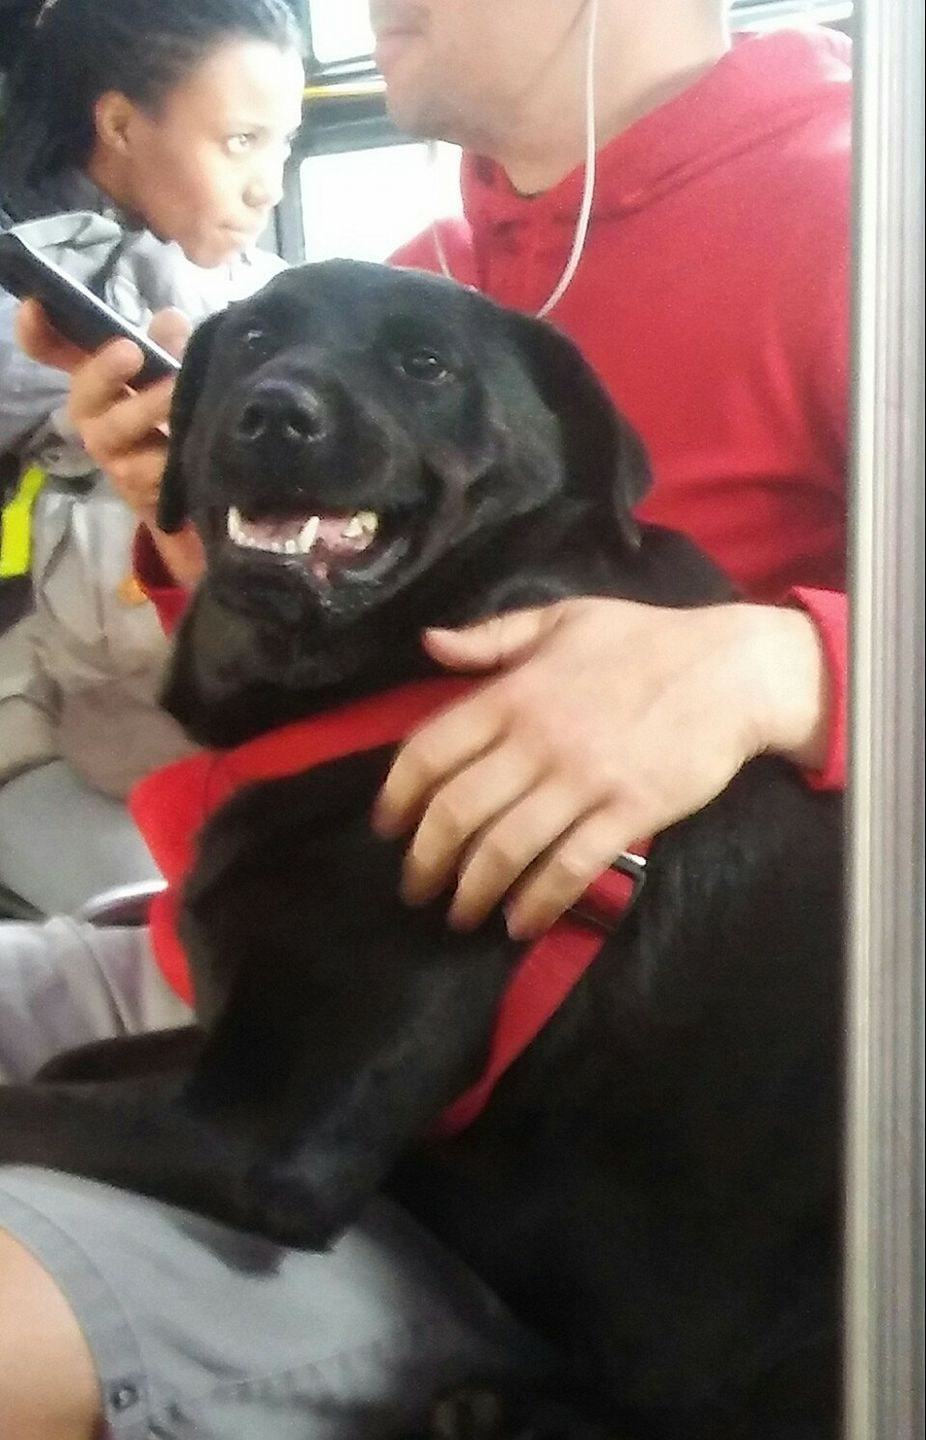 the dog sits next to the man while riding the bus